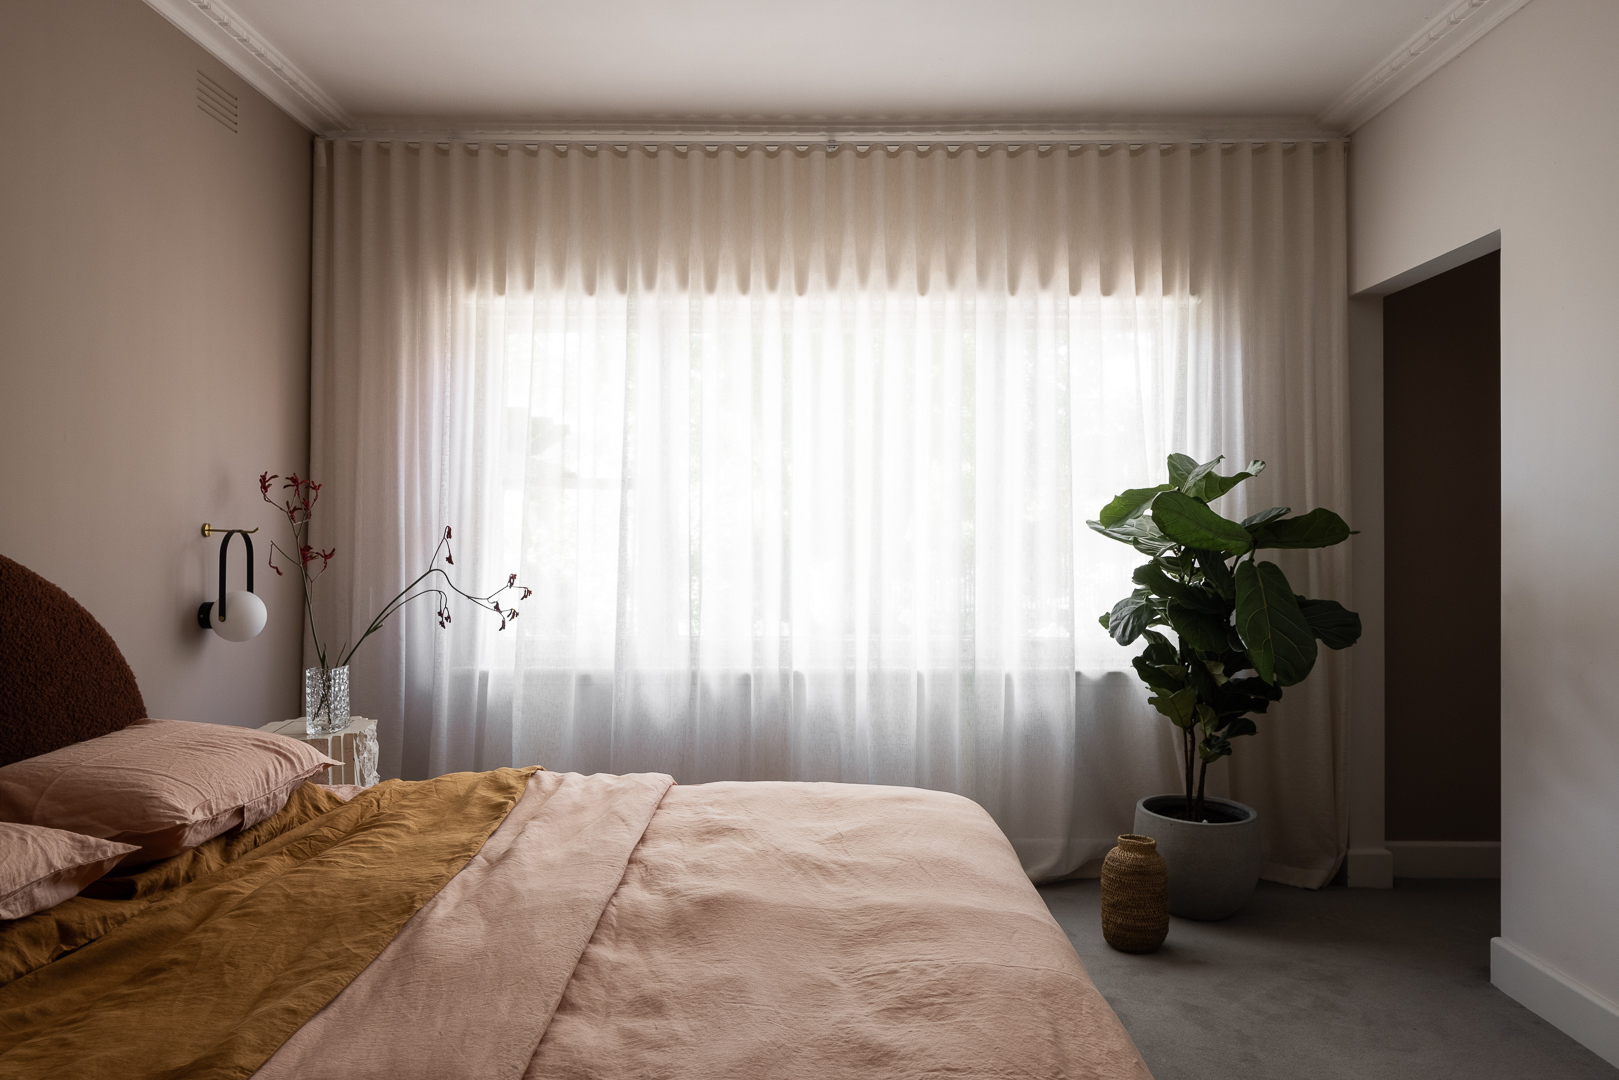 02 22 Leith Road Dylan James Bedroom Sheer Curtains and Roller Blinds Allusion Marzipan and Vivid Block White 6